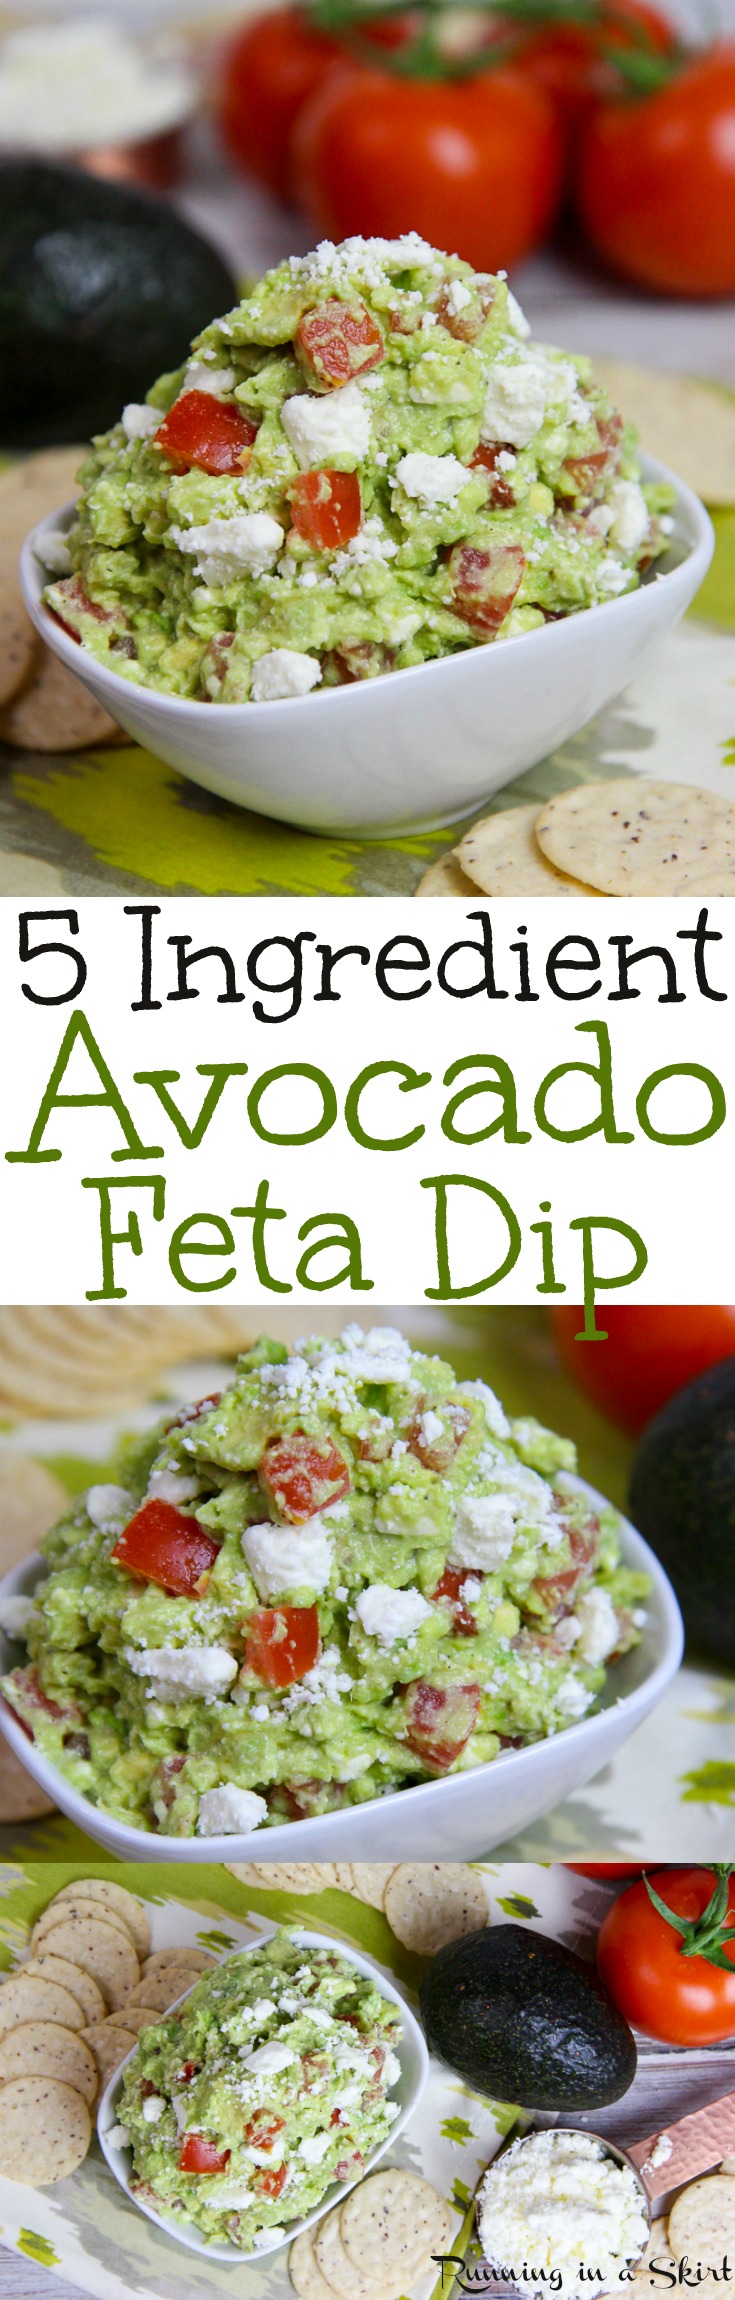 5 Ingredient Easy Avocado Feta Dip recipe- Mediterranean flavors with lemon, garlic and tomato! A perfect appetizer!  Use as simple healthy food for parties (like Super Bowl or Holidays), snacks or a cold spread for a wrap or sandwich. / Running in a Skirt via @juliewunder